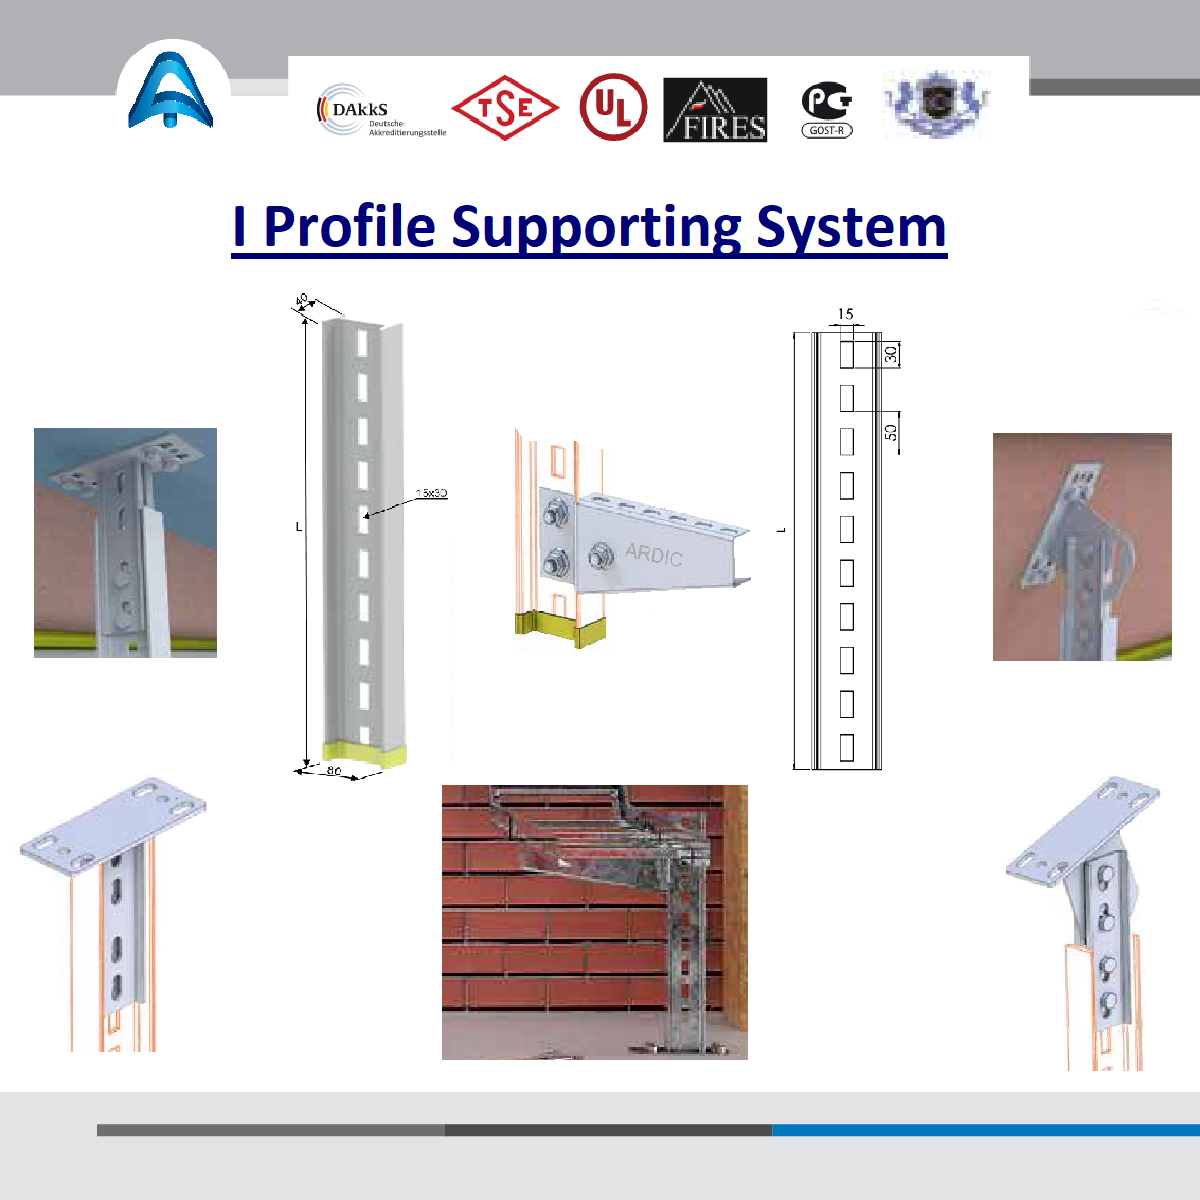 I Profile Supporting System